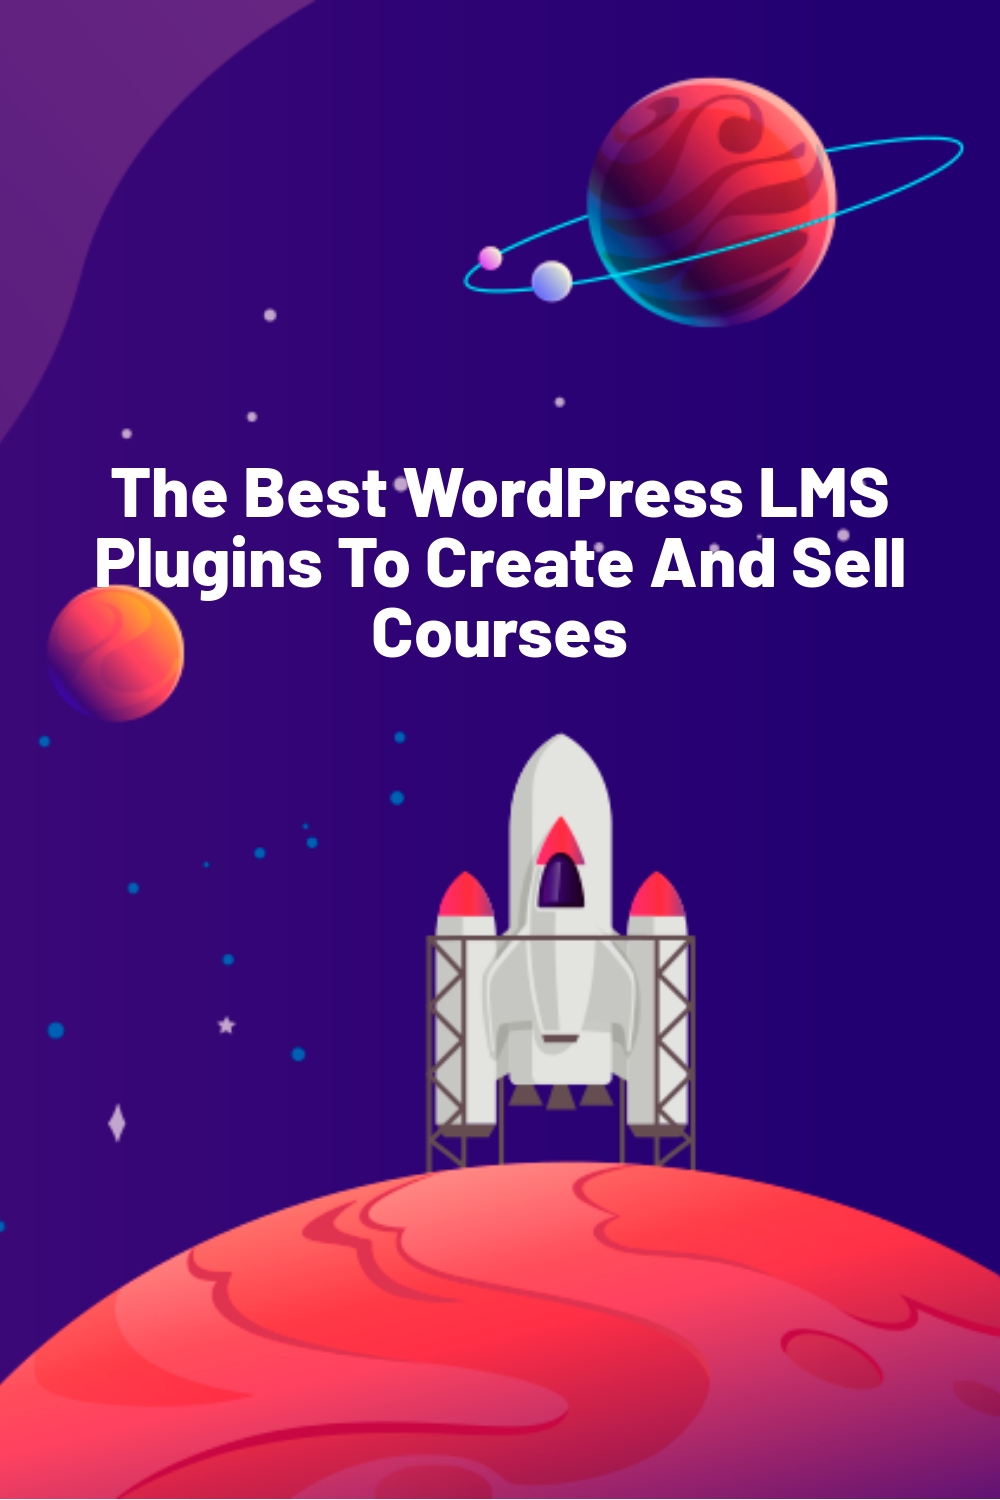 The Best WordPress LMS Plugins To Create And Sell Courses